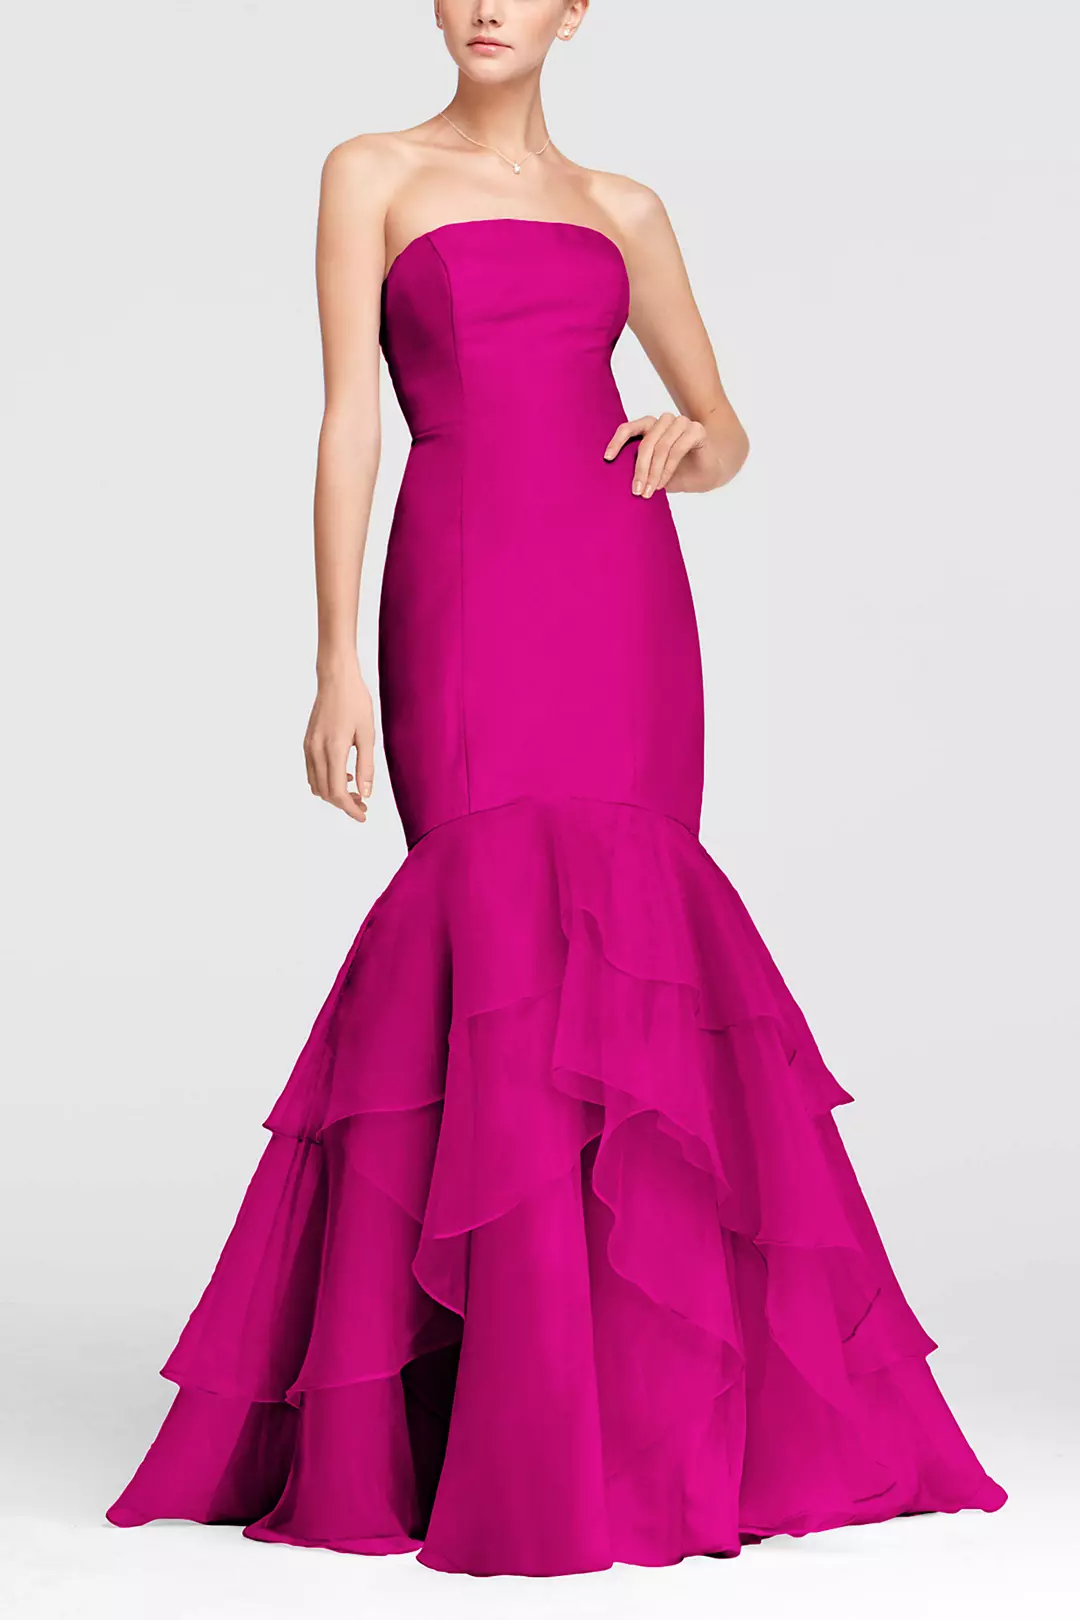 Strapless Fit and Flare Organza Dress Image